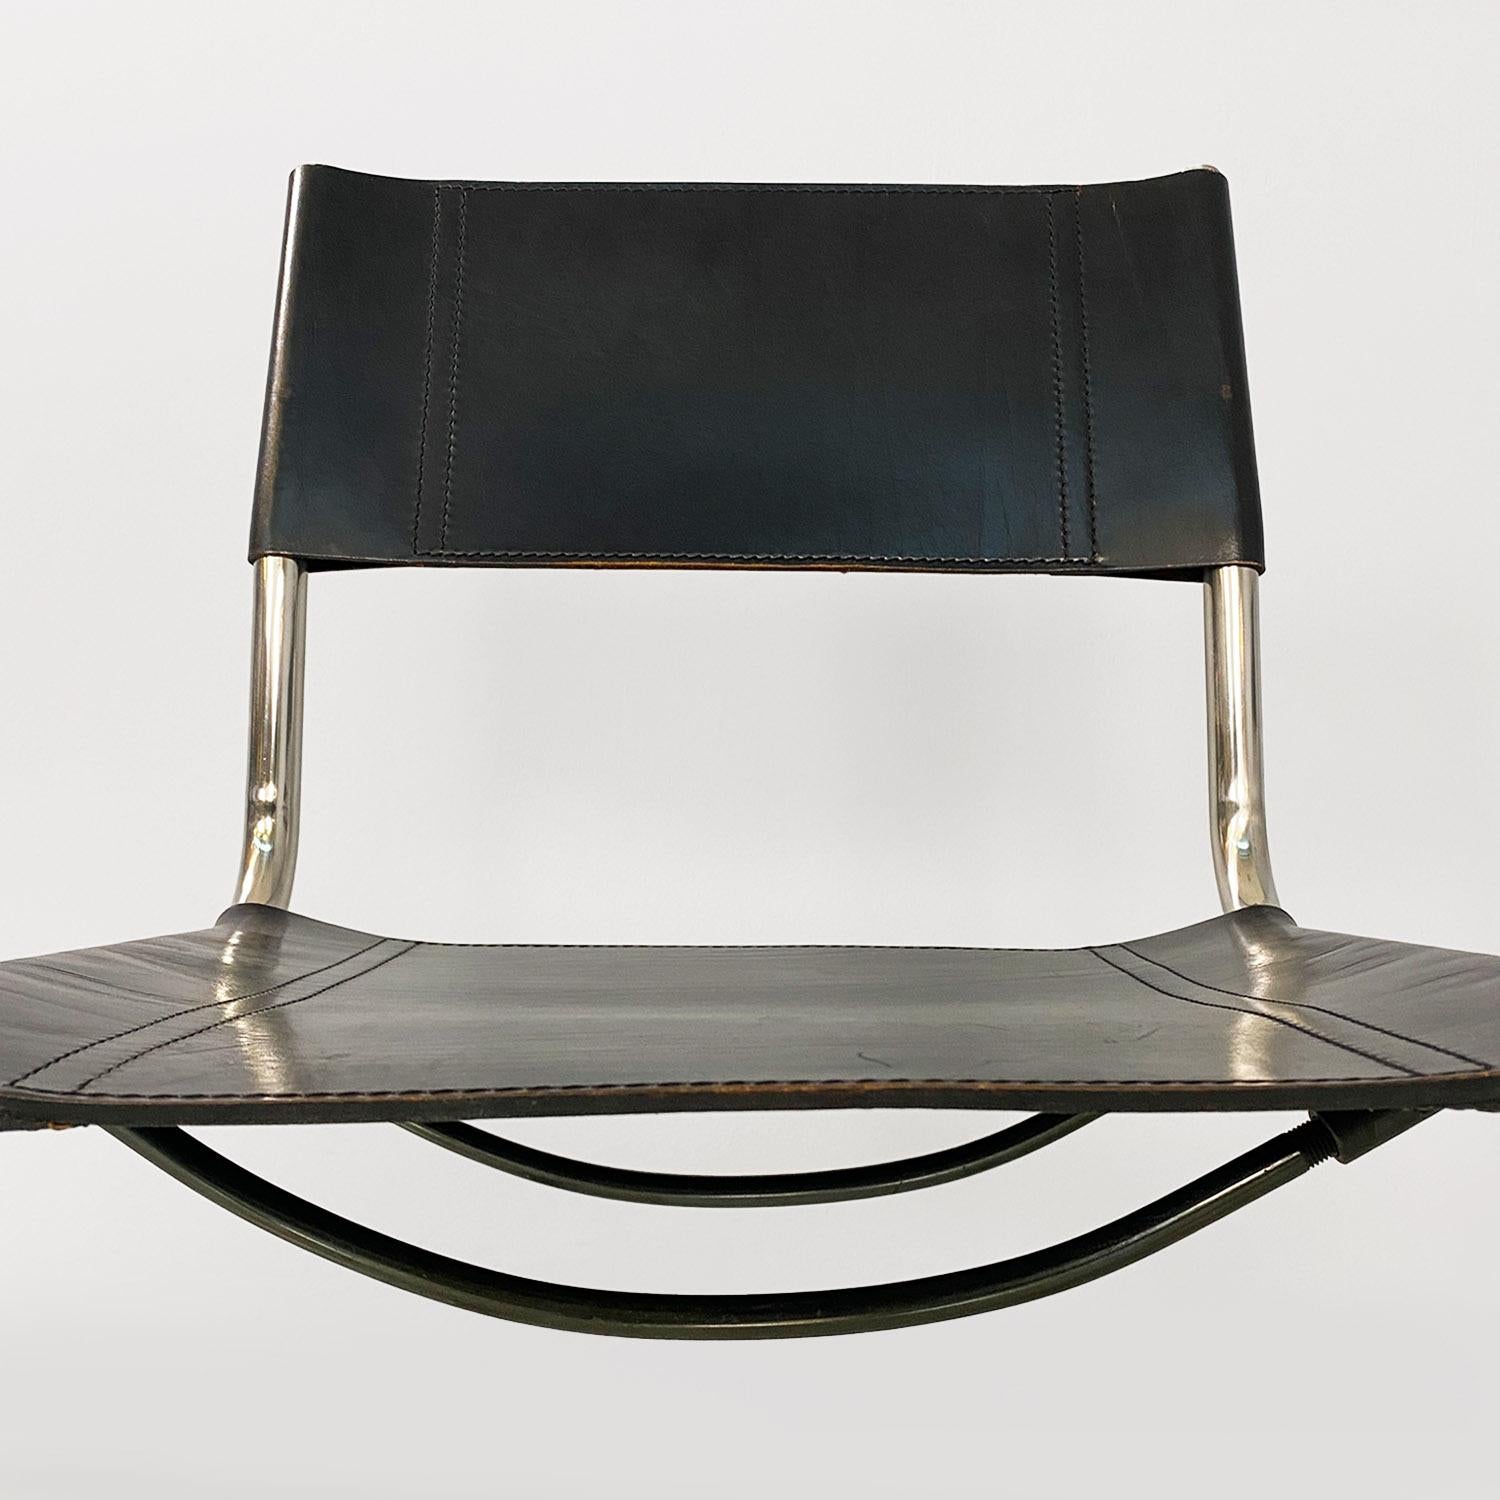 Italian modern black leather and tubolar chromed metal chairs by Zanotta, 1970s For Sale 2